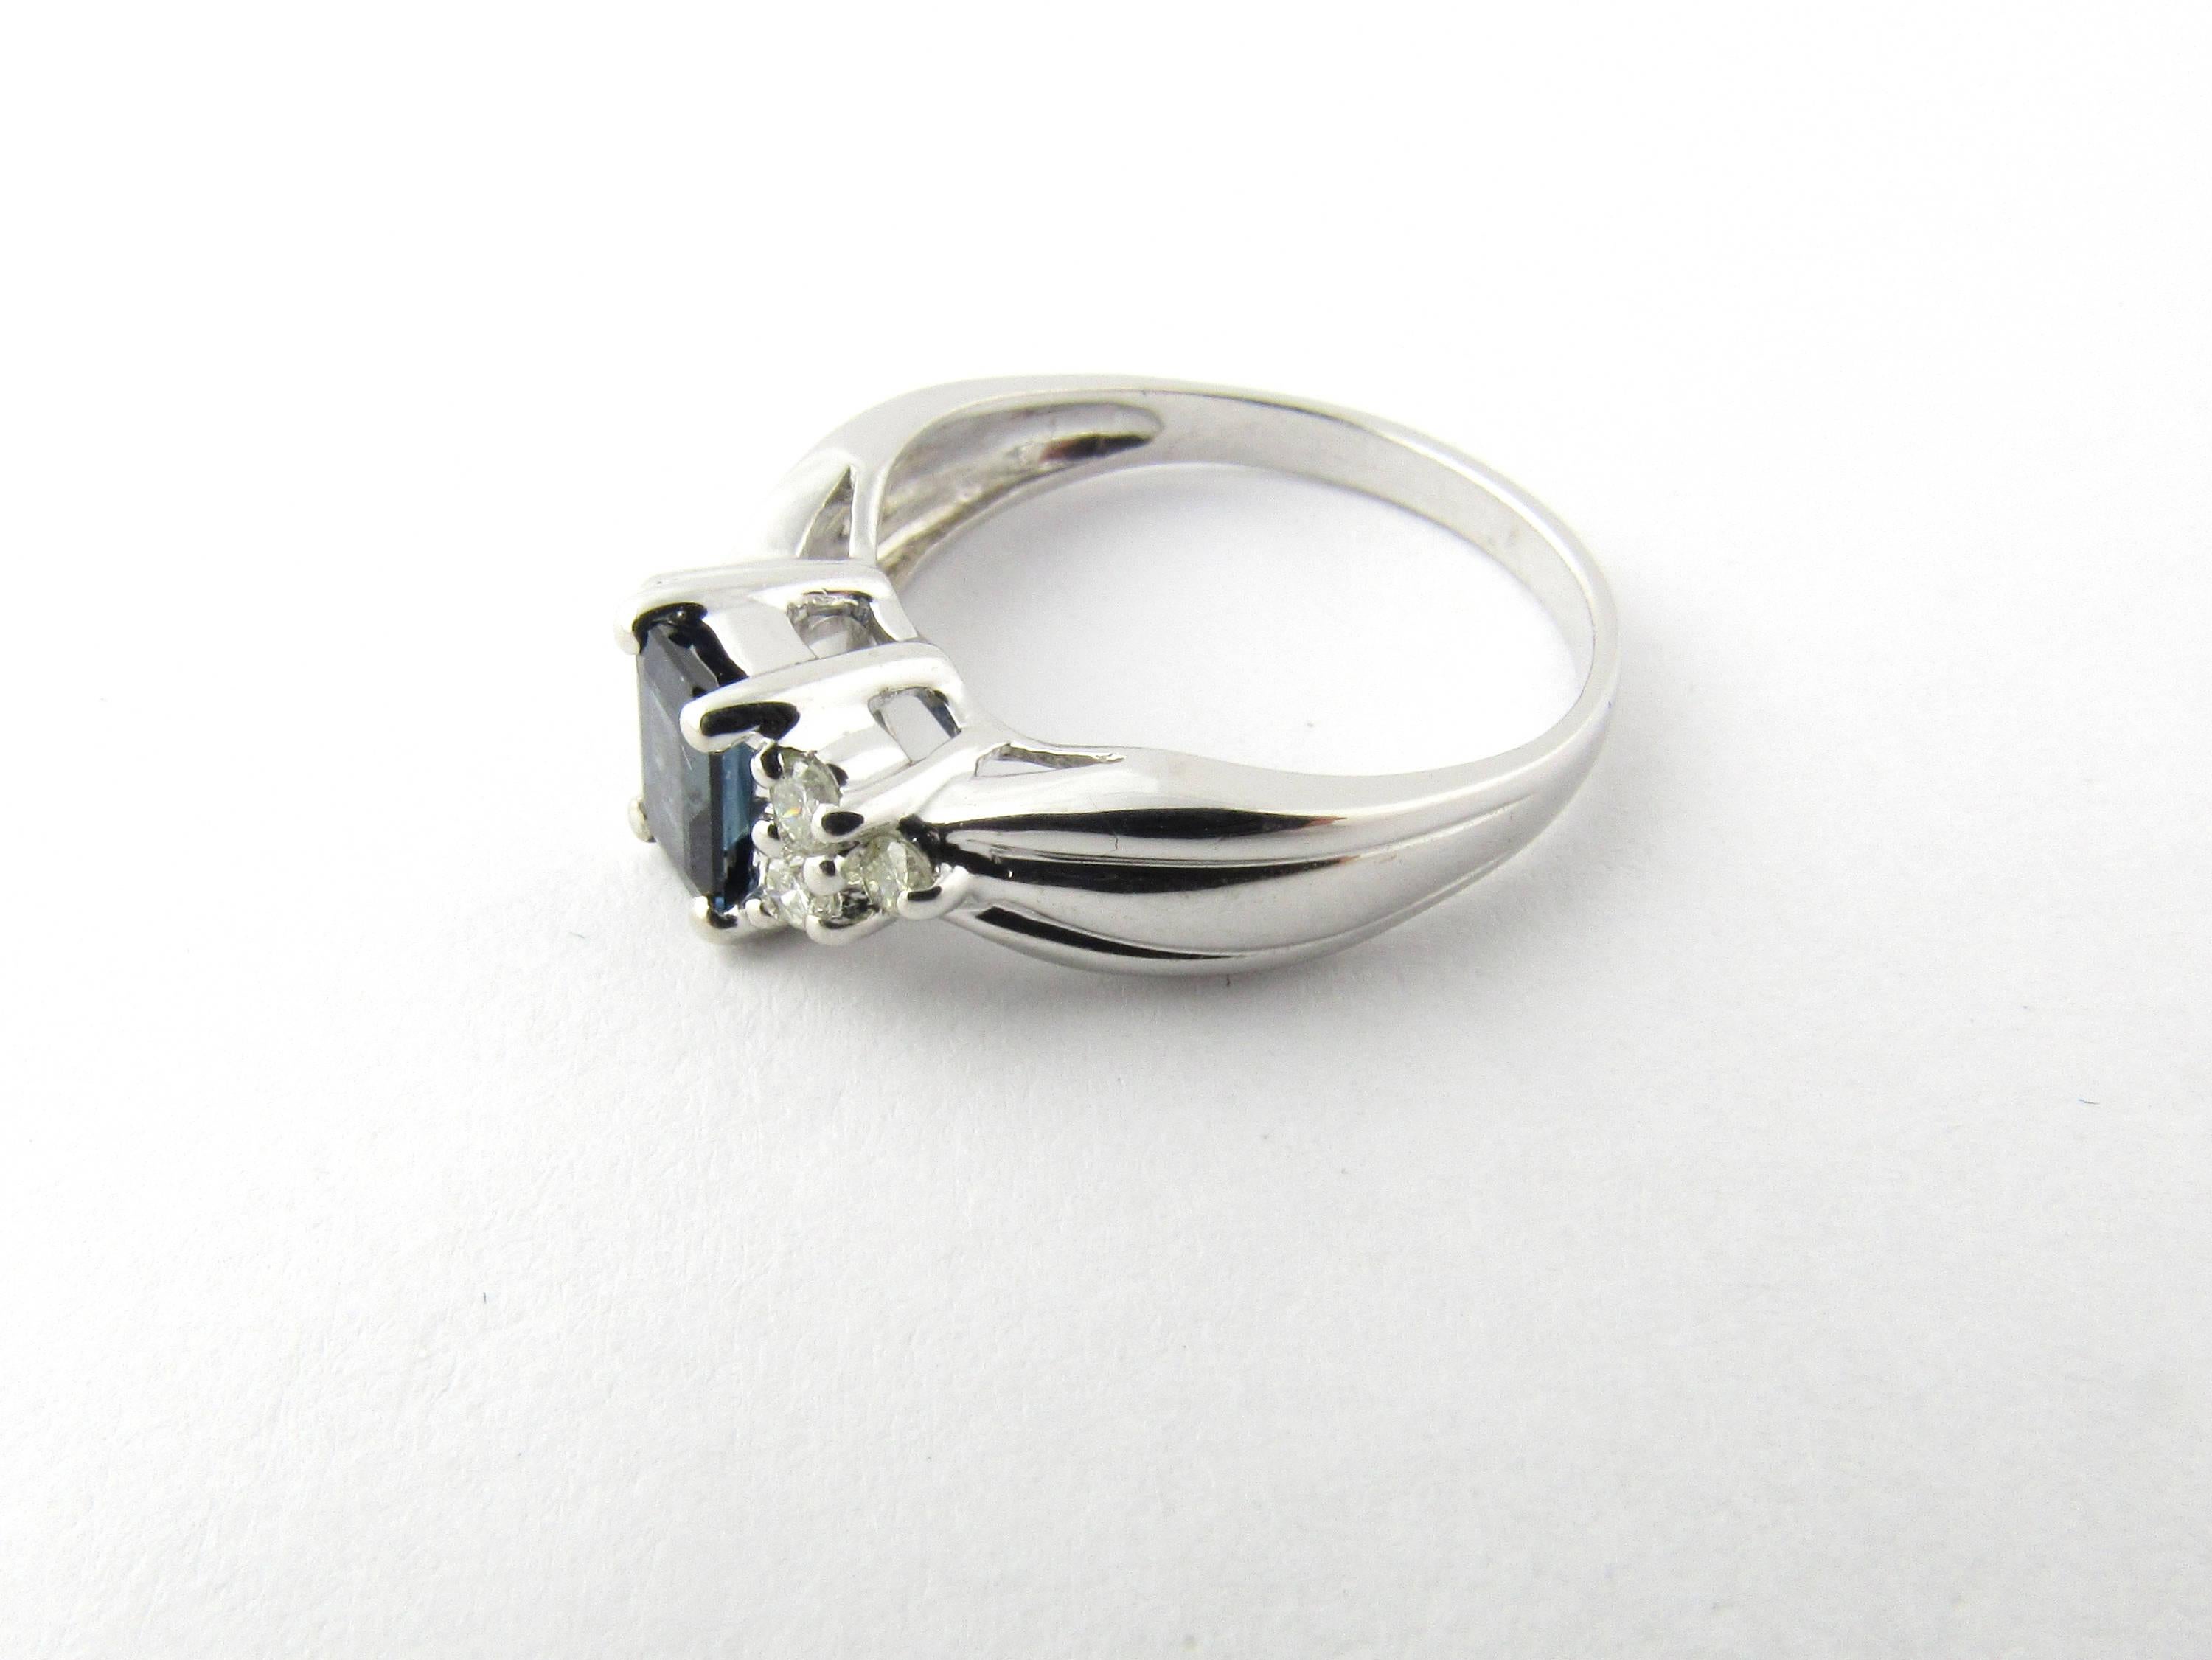 Vintage 14 Karat White Gold Sapphire and Diamond Ring Size 4.75- 
This lovely ring features one emerald cut sapphire (6 mm x 4 mm) accented with six round brilliant cut diamonds and set in classic 14K white gold. Shank 2 mm. 
Approximate total